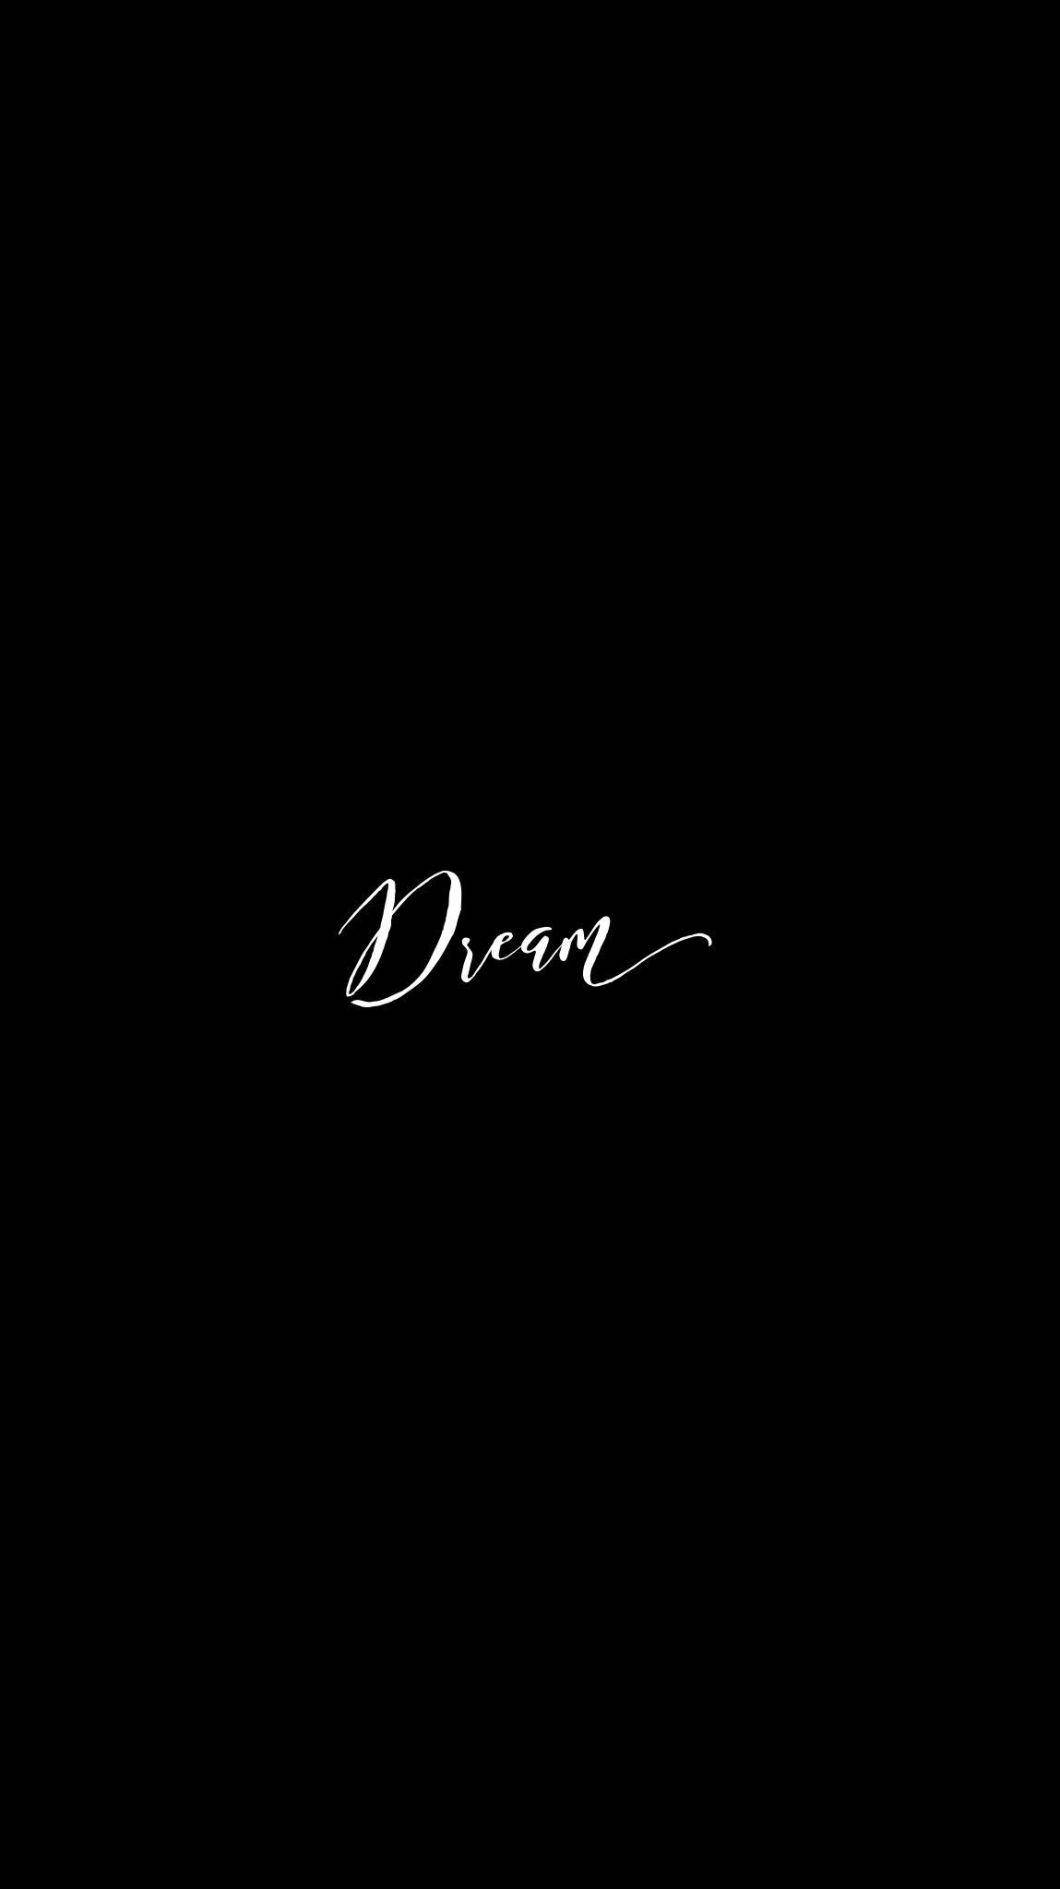 Pure Black With Word "dream" Wallpaper